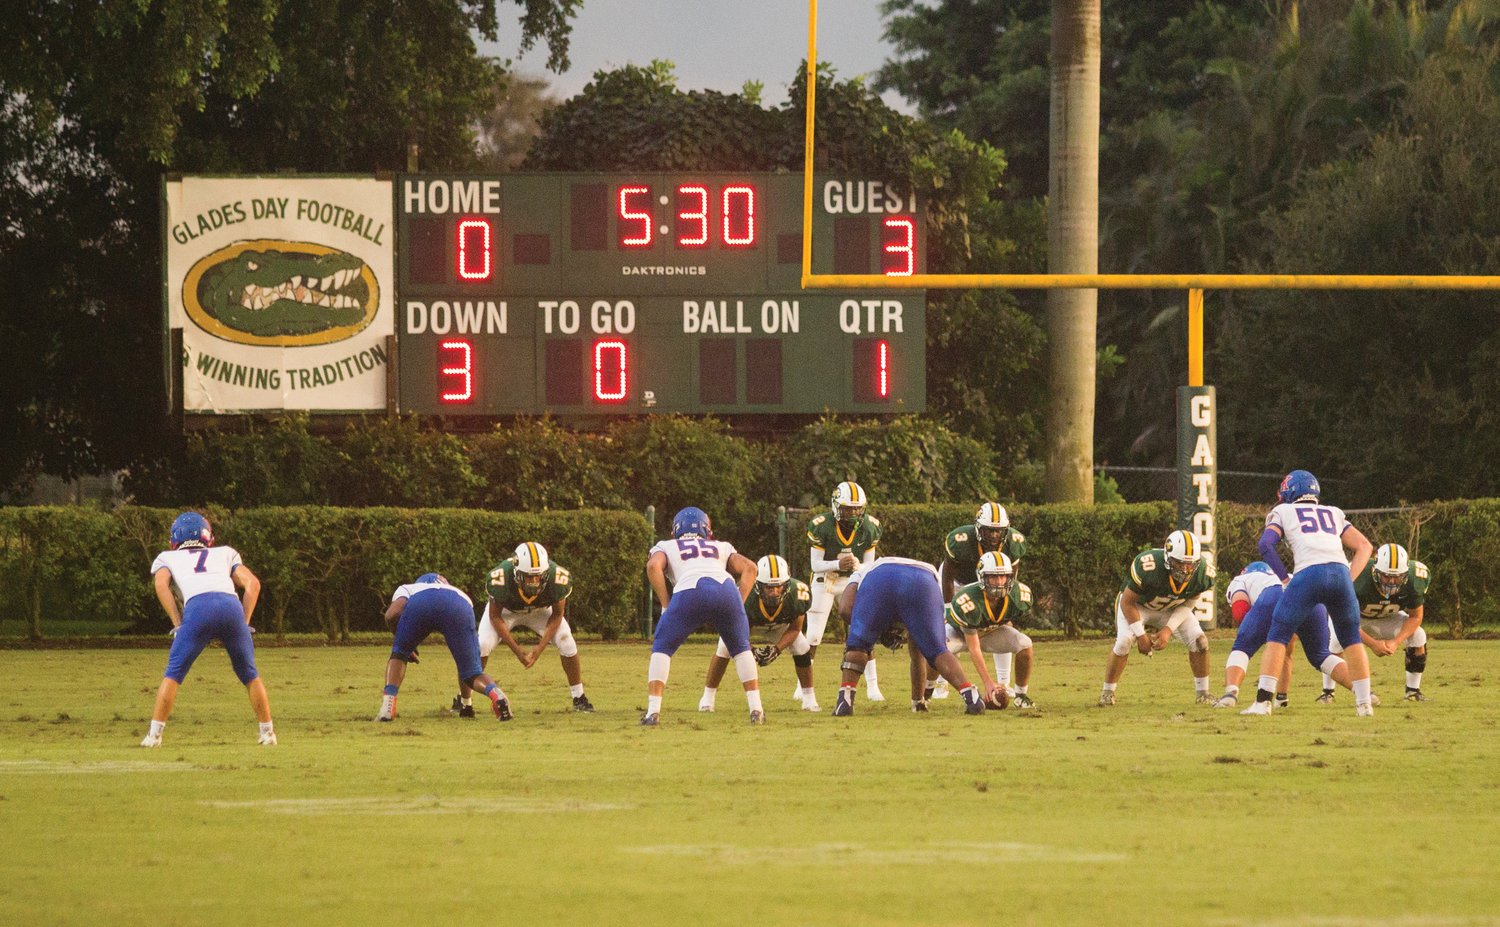 The Glades Day Gators will be home again this week, hosting Berean Christian.